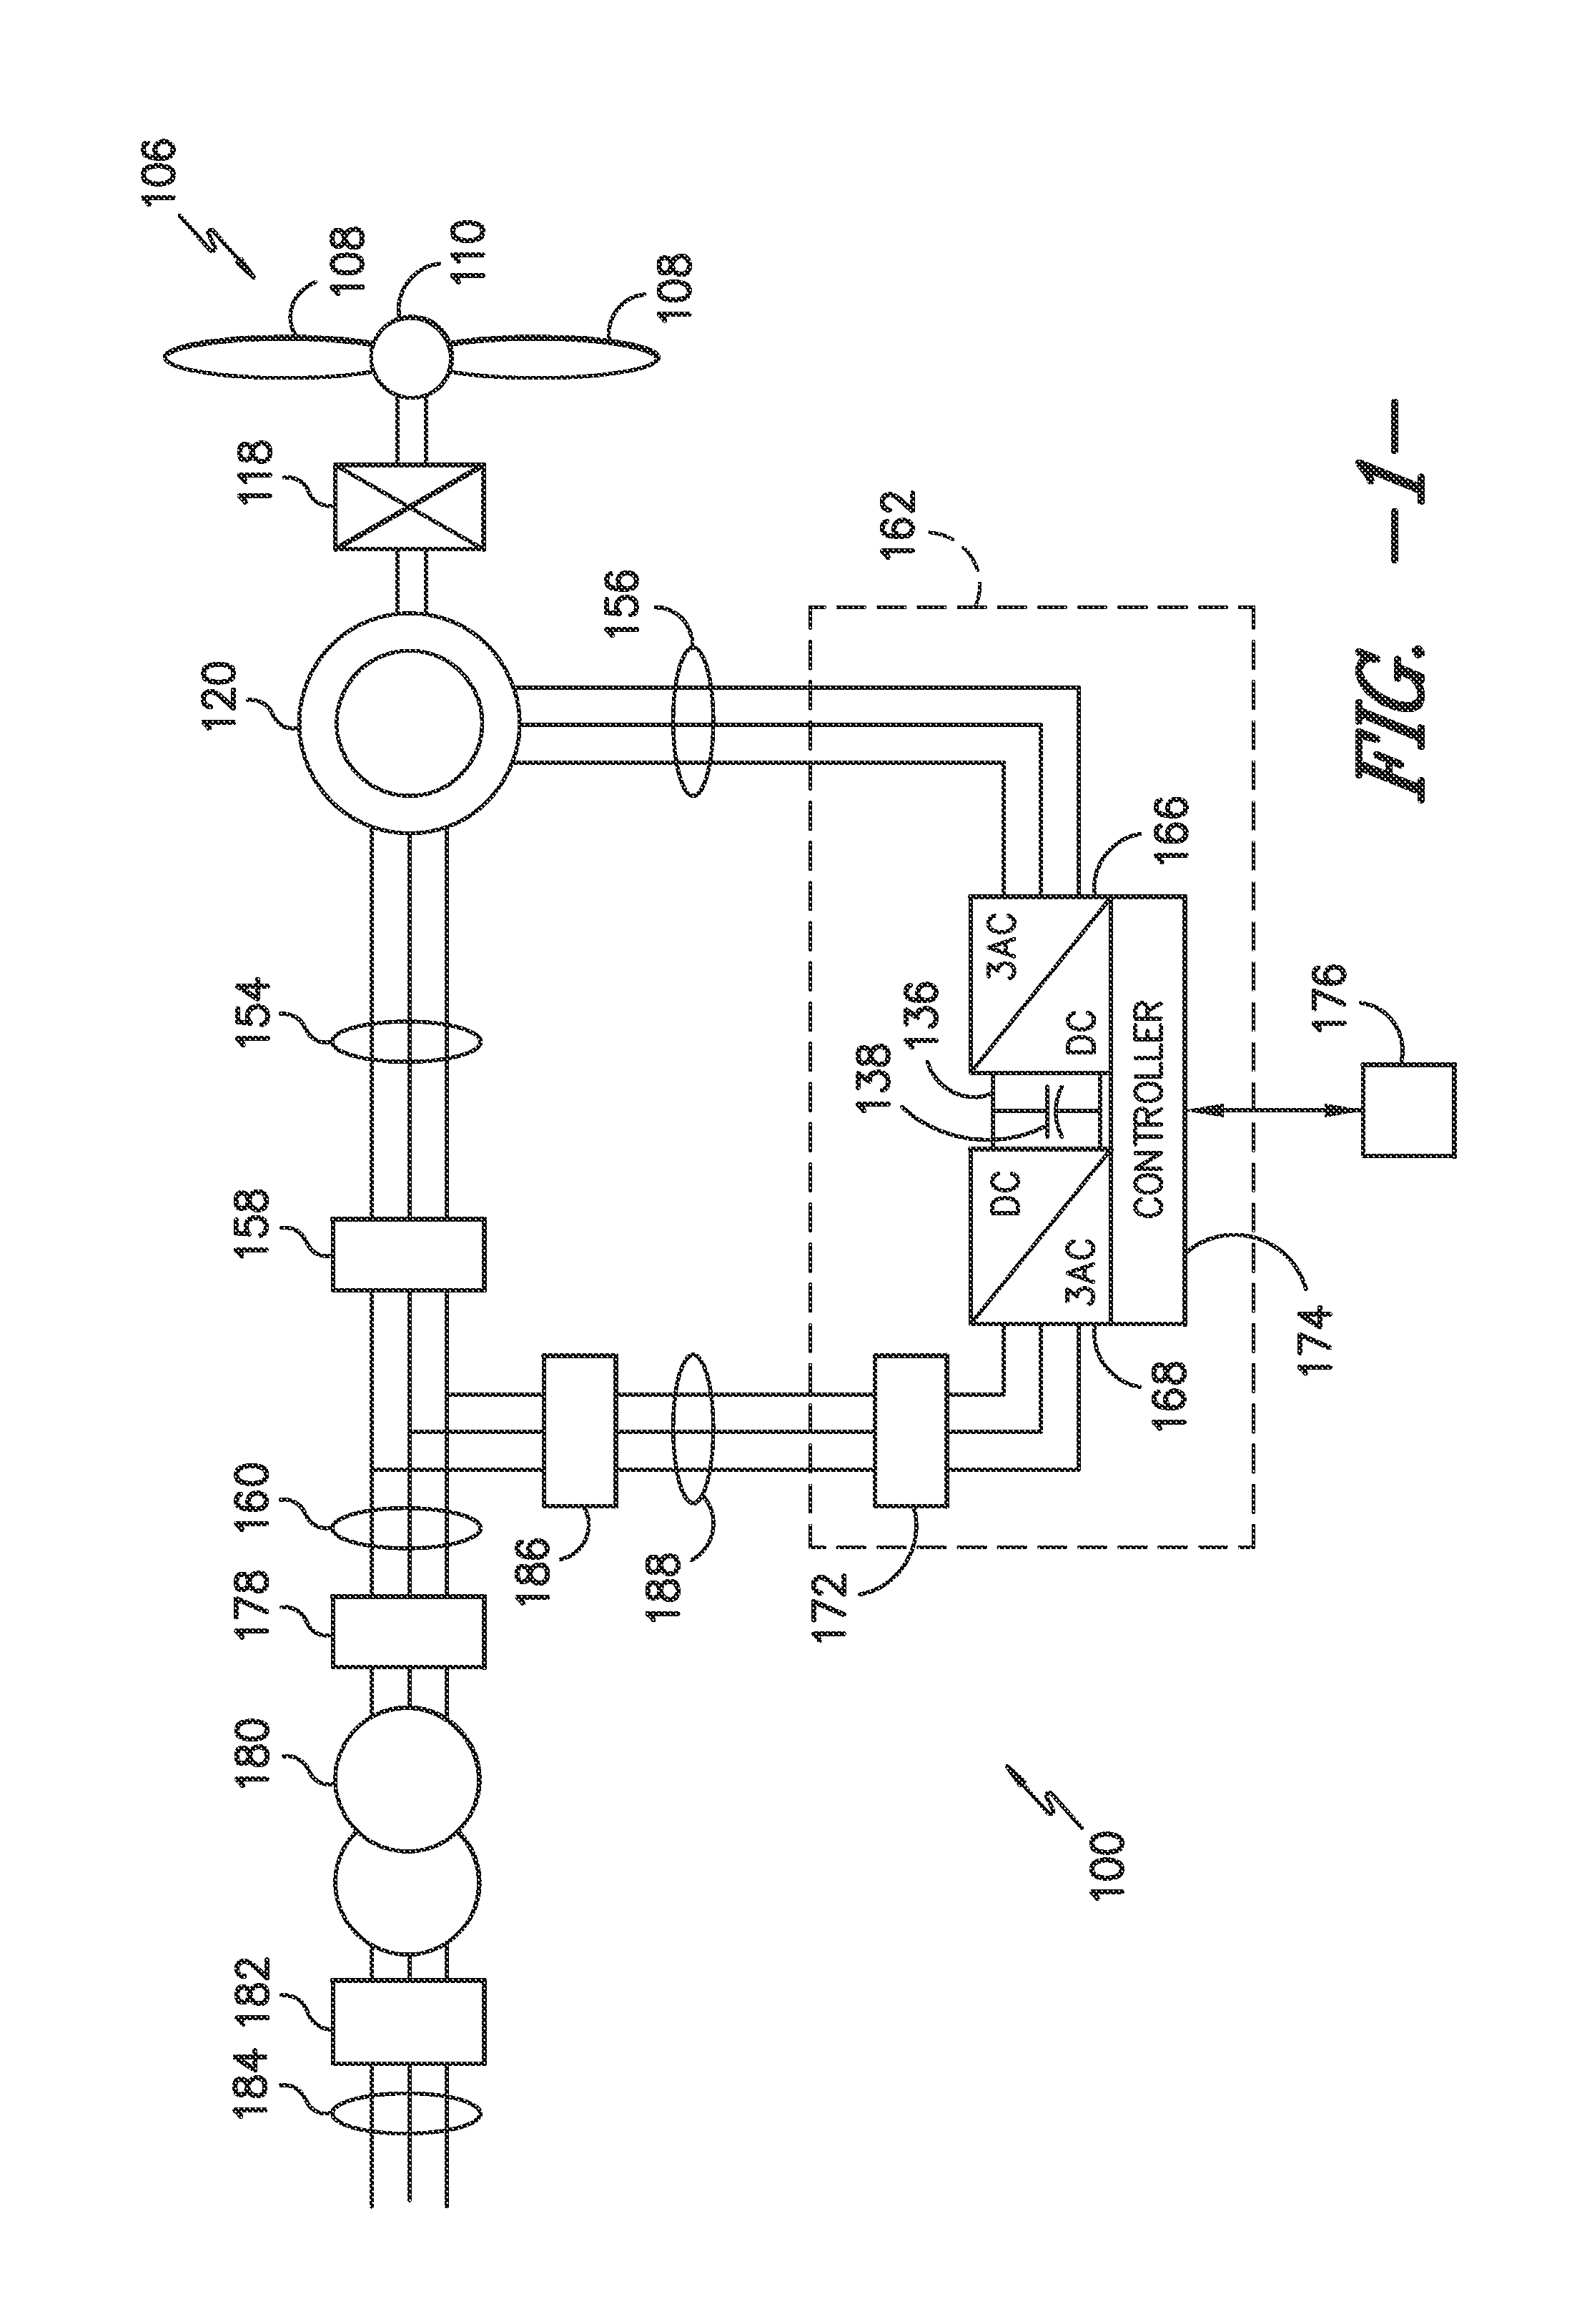 Magnetic structure combining normal mode and common mode inductance